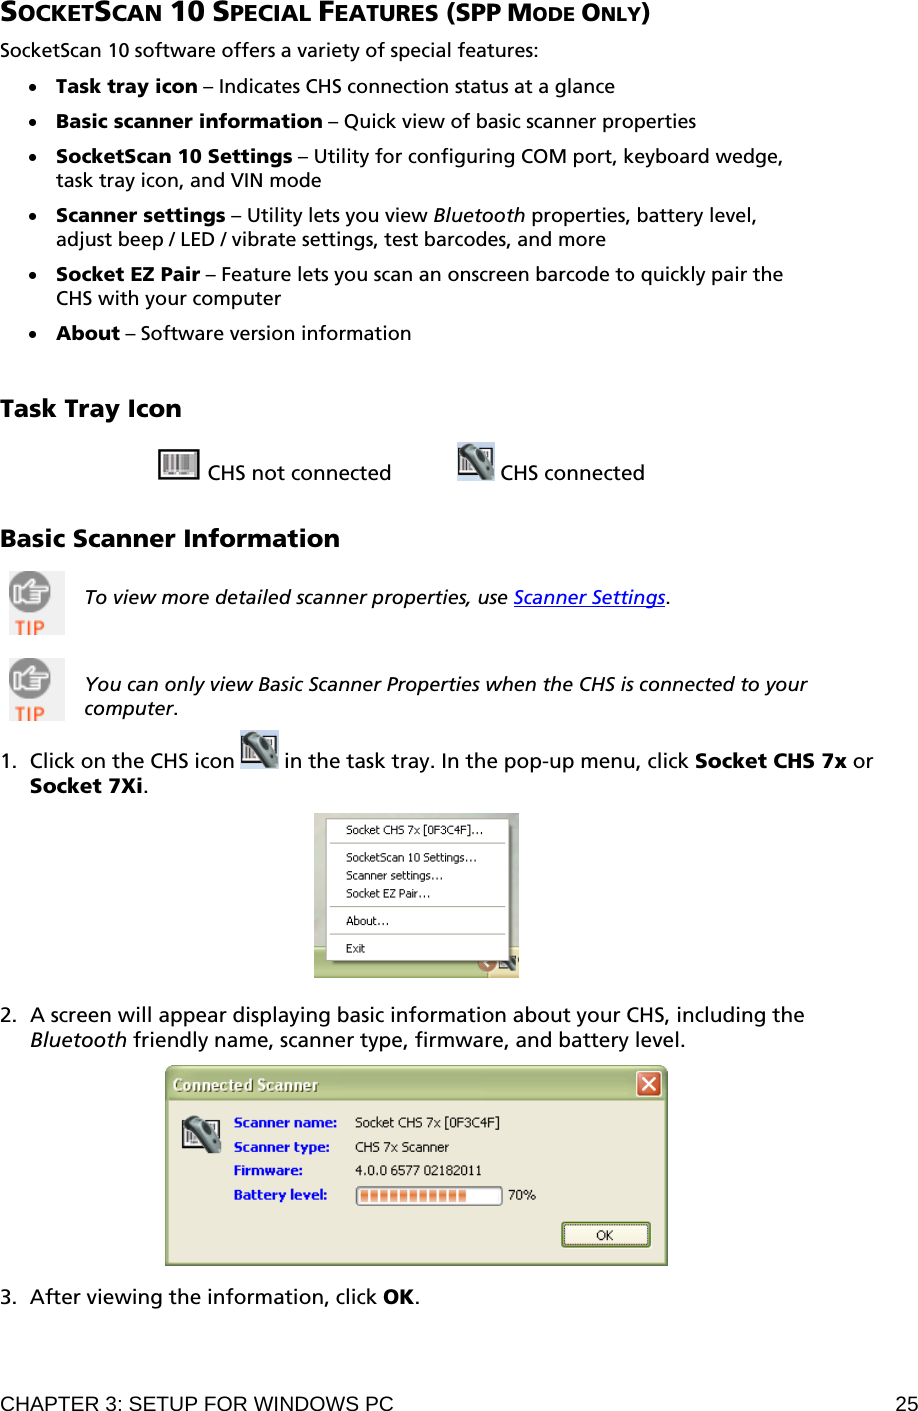 CHAPTER 3: SETUP FOR WINDOWS PC  25 SOCKETSCAN 10 SPECIAL FEATURES (SPP MODE ONLY)  SocketScan 10 software offers a variety of special features:  • Task tray icon – Indicates CHS connection status at a glance  • Basic scanner information – Quick view of basic scanner properties  • SocketScan 10 Settings – Utility for configuring COM port, keyboard wedge, task tray icon, and VIN mode  • Scanner settings – Utility lets you view Bluetooth properties, battery level, adjust beep / LED / vibrate settings, test barcodes, and more  • Socket EZ Pair – Feature lets you scan an onscreen barcode to quickly pair the CHS with your computer  • About – Software version information   Task Tray Icon   CHS not connected     CHS connected   Basic Scanner Information   To view more detailed scanner properties, use Scanner Settings.    You can only view Basic Scanner Properties when the CHS is connected to your computer.  1. Click on the CHS icon   in the task tray. In the pop-up menu, click Socket CHS 7x or Socket 7Xi.    2. A screen will appear displaying basic information about your CHS, including the Bluetooth friendly name, scanner type, firmware, and battery level.    3. After viewing the information, click OK. 